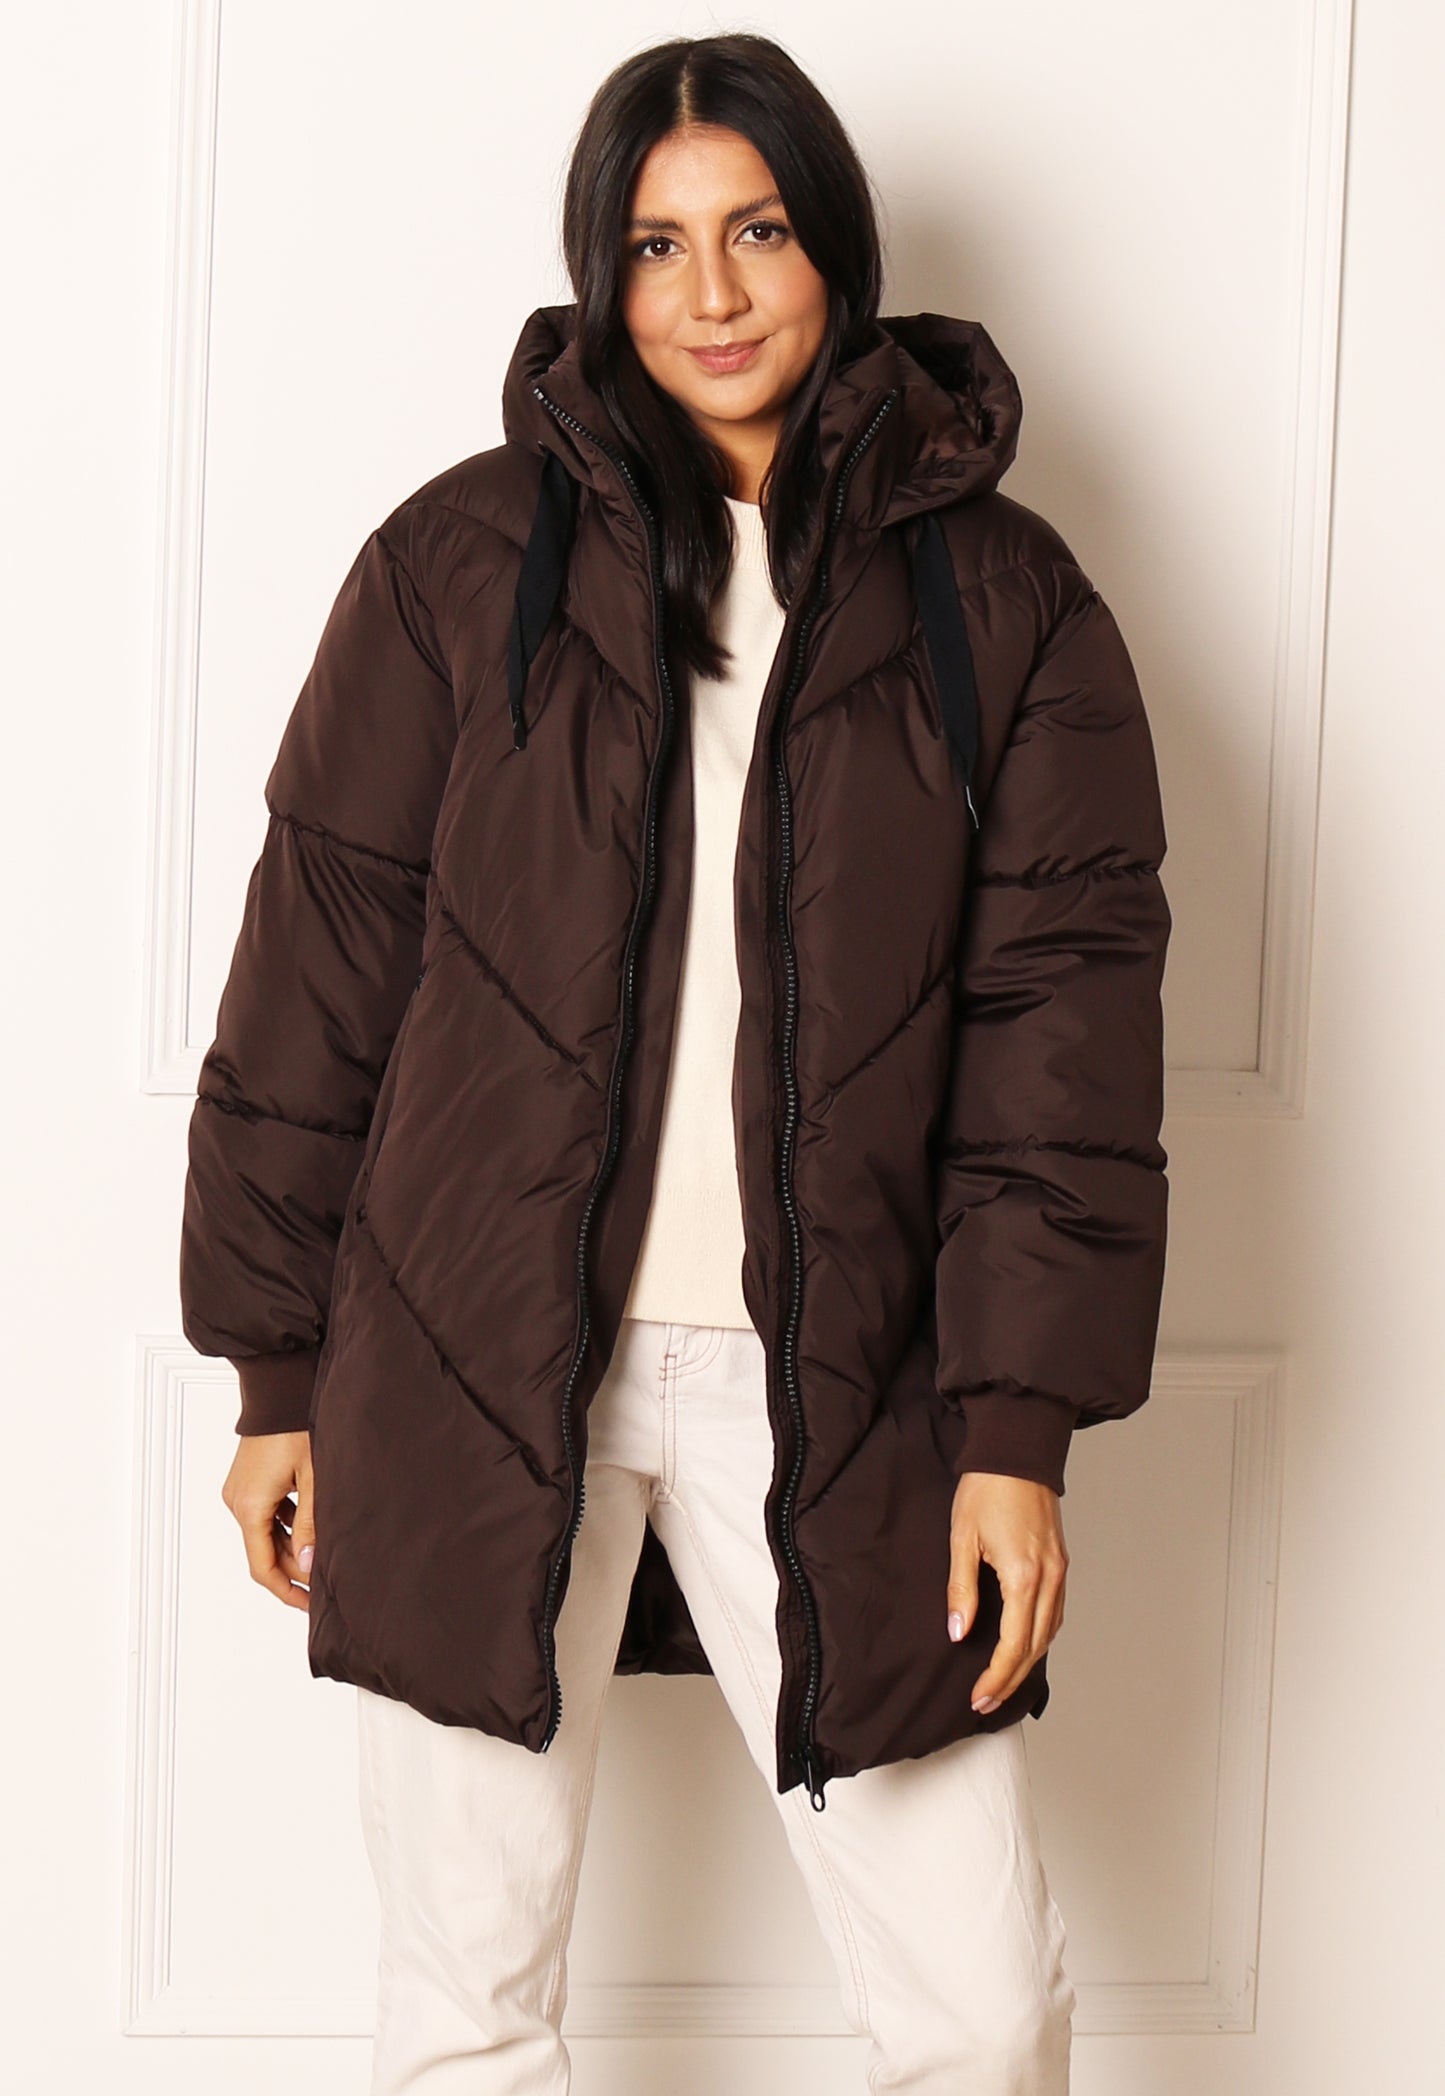 VERO MODA Beverly Oversized Longline Chevron Puffer Coat with Hood in Chocolate Brown - One Nation Clothing